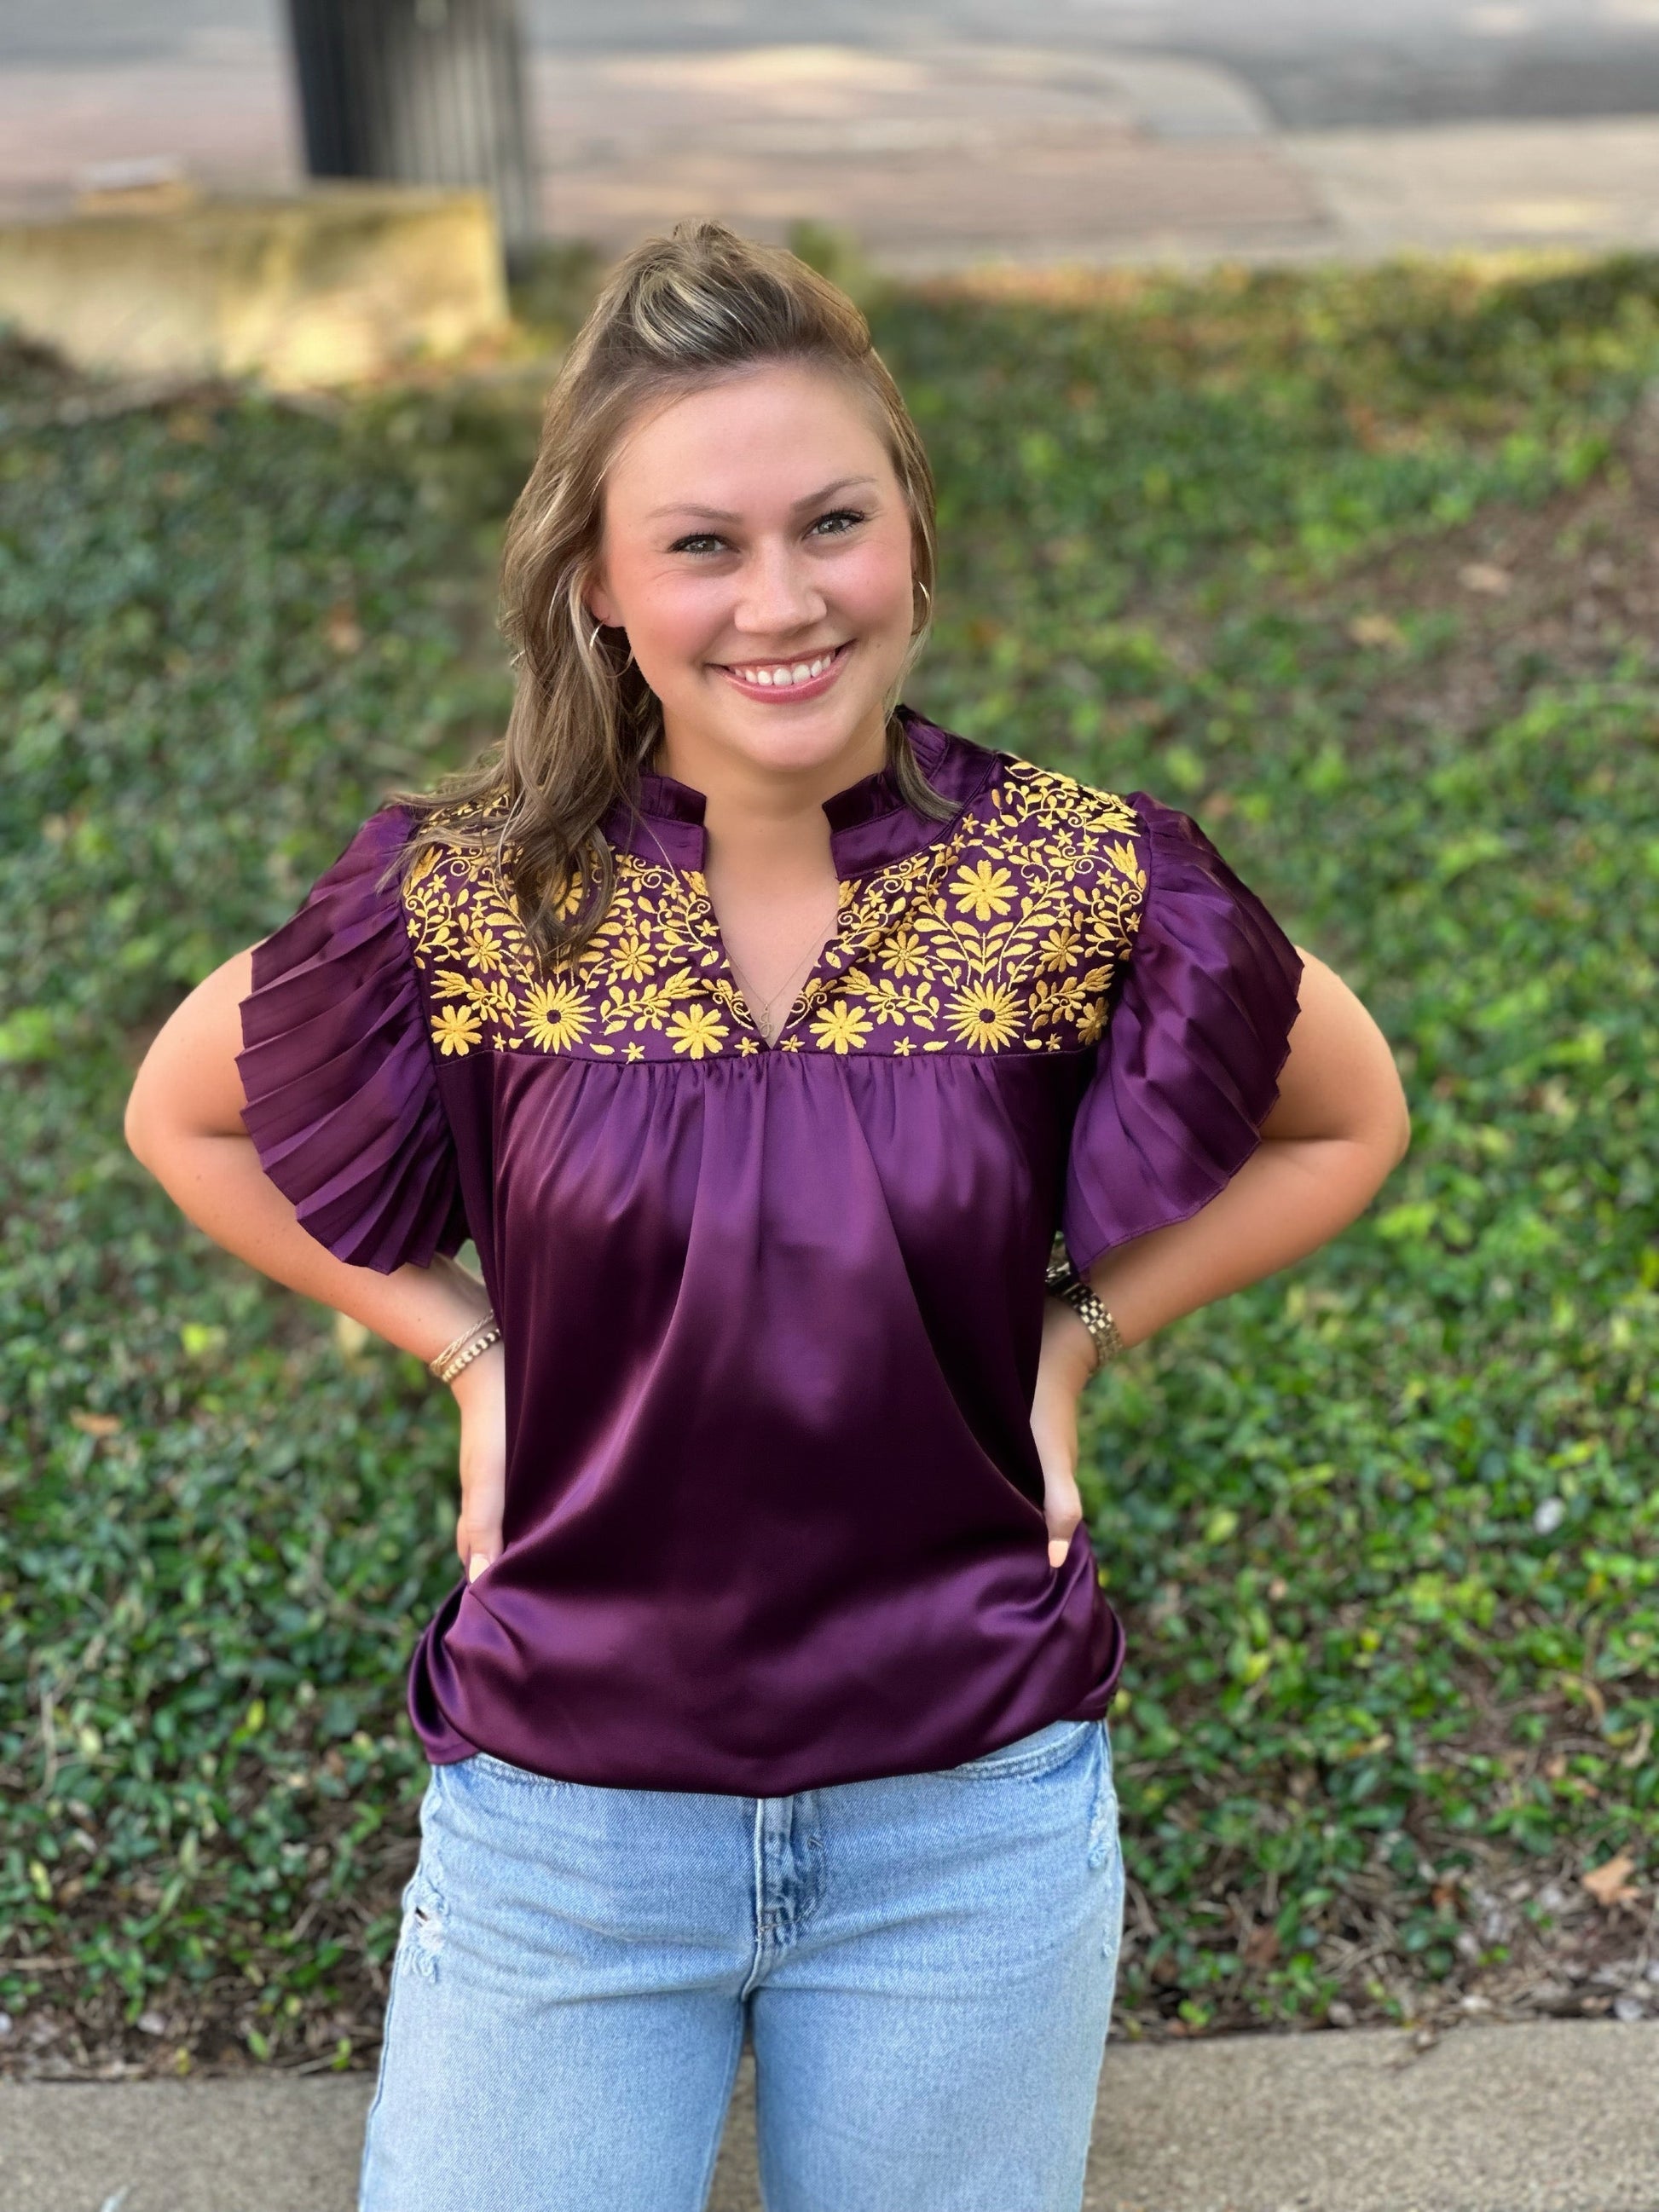 Hey LSU Fans, the Breck Top by Washco Apparel is fun, soft and silky! We love the pop of beautiful gold embroidery design on the front and that it is part of our Game Day Collection!